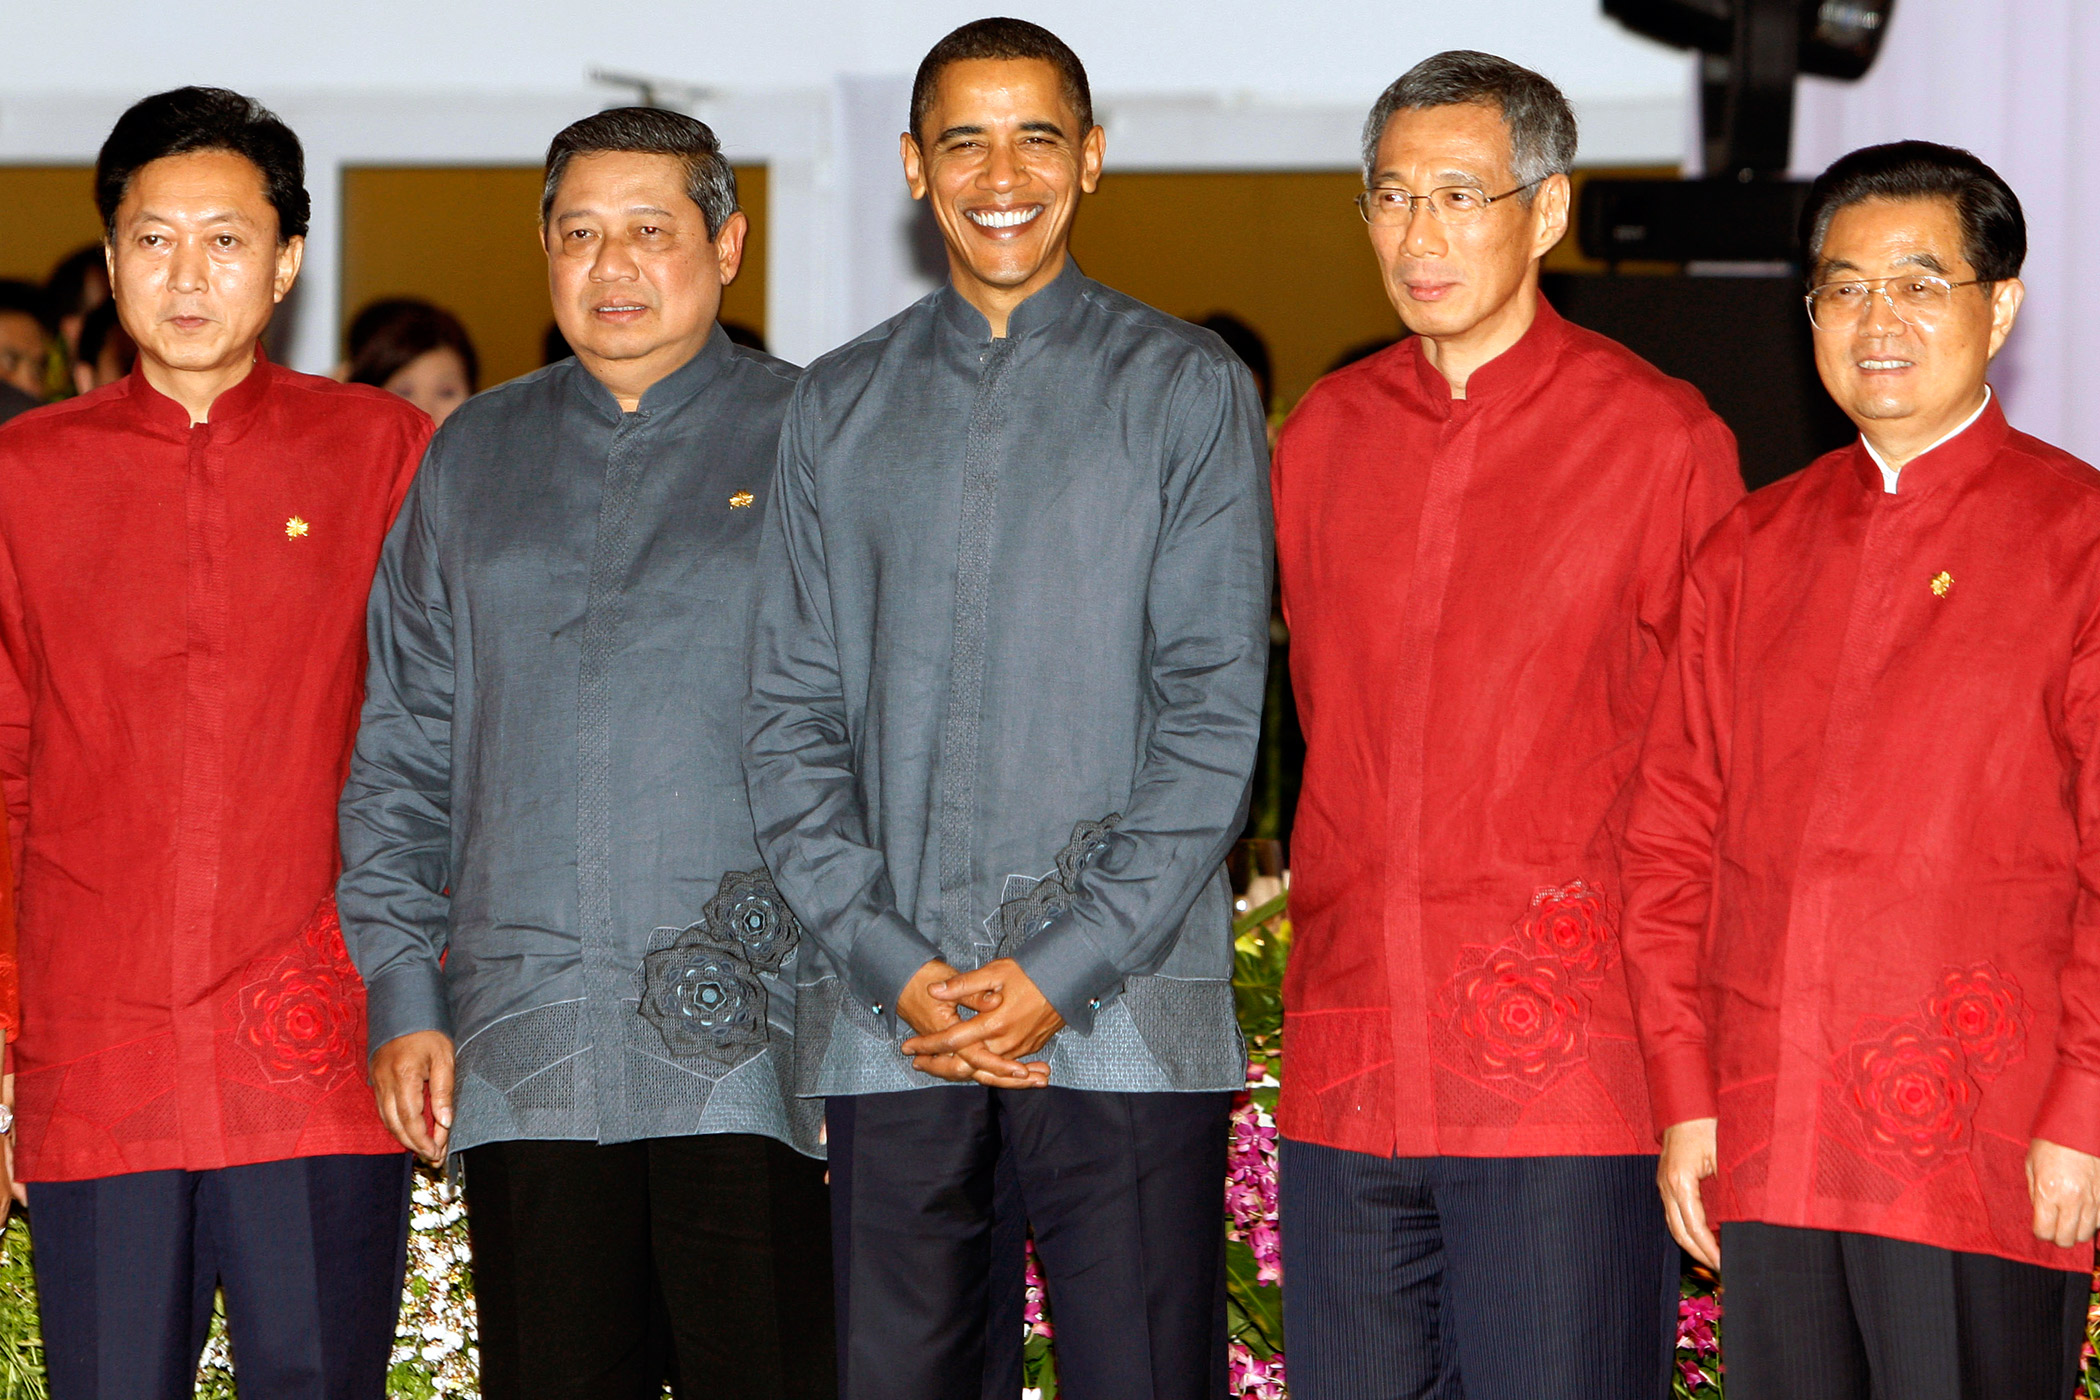 U.S. President Barack Obama poses with APEC leaders in traditional shirts for a group photo at the APEC Summit in Singapore on Nov. 14, 2009.